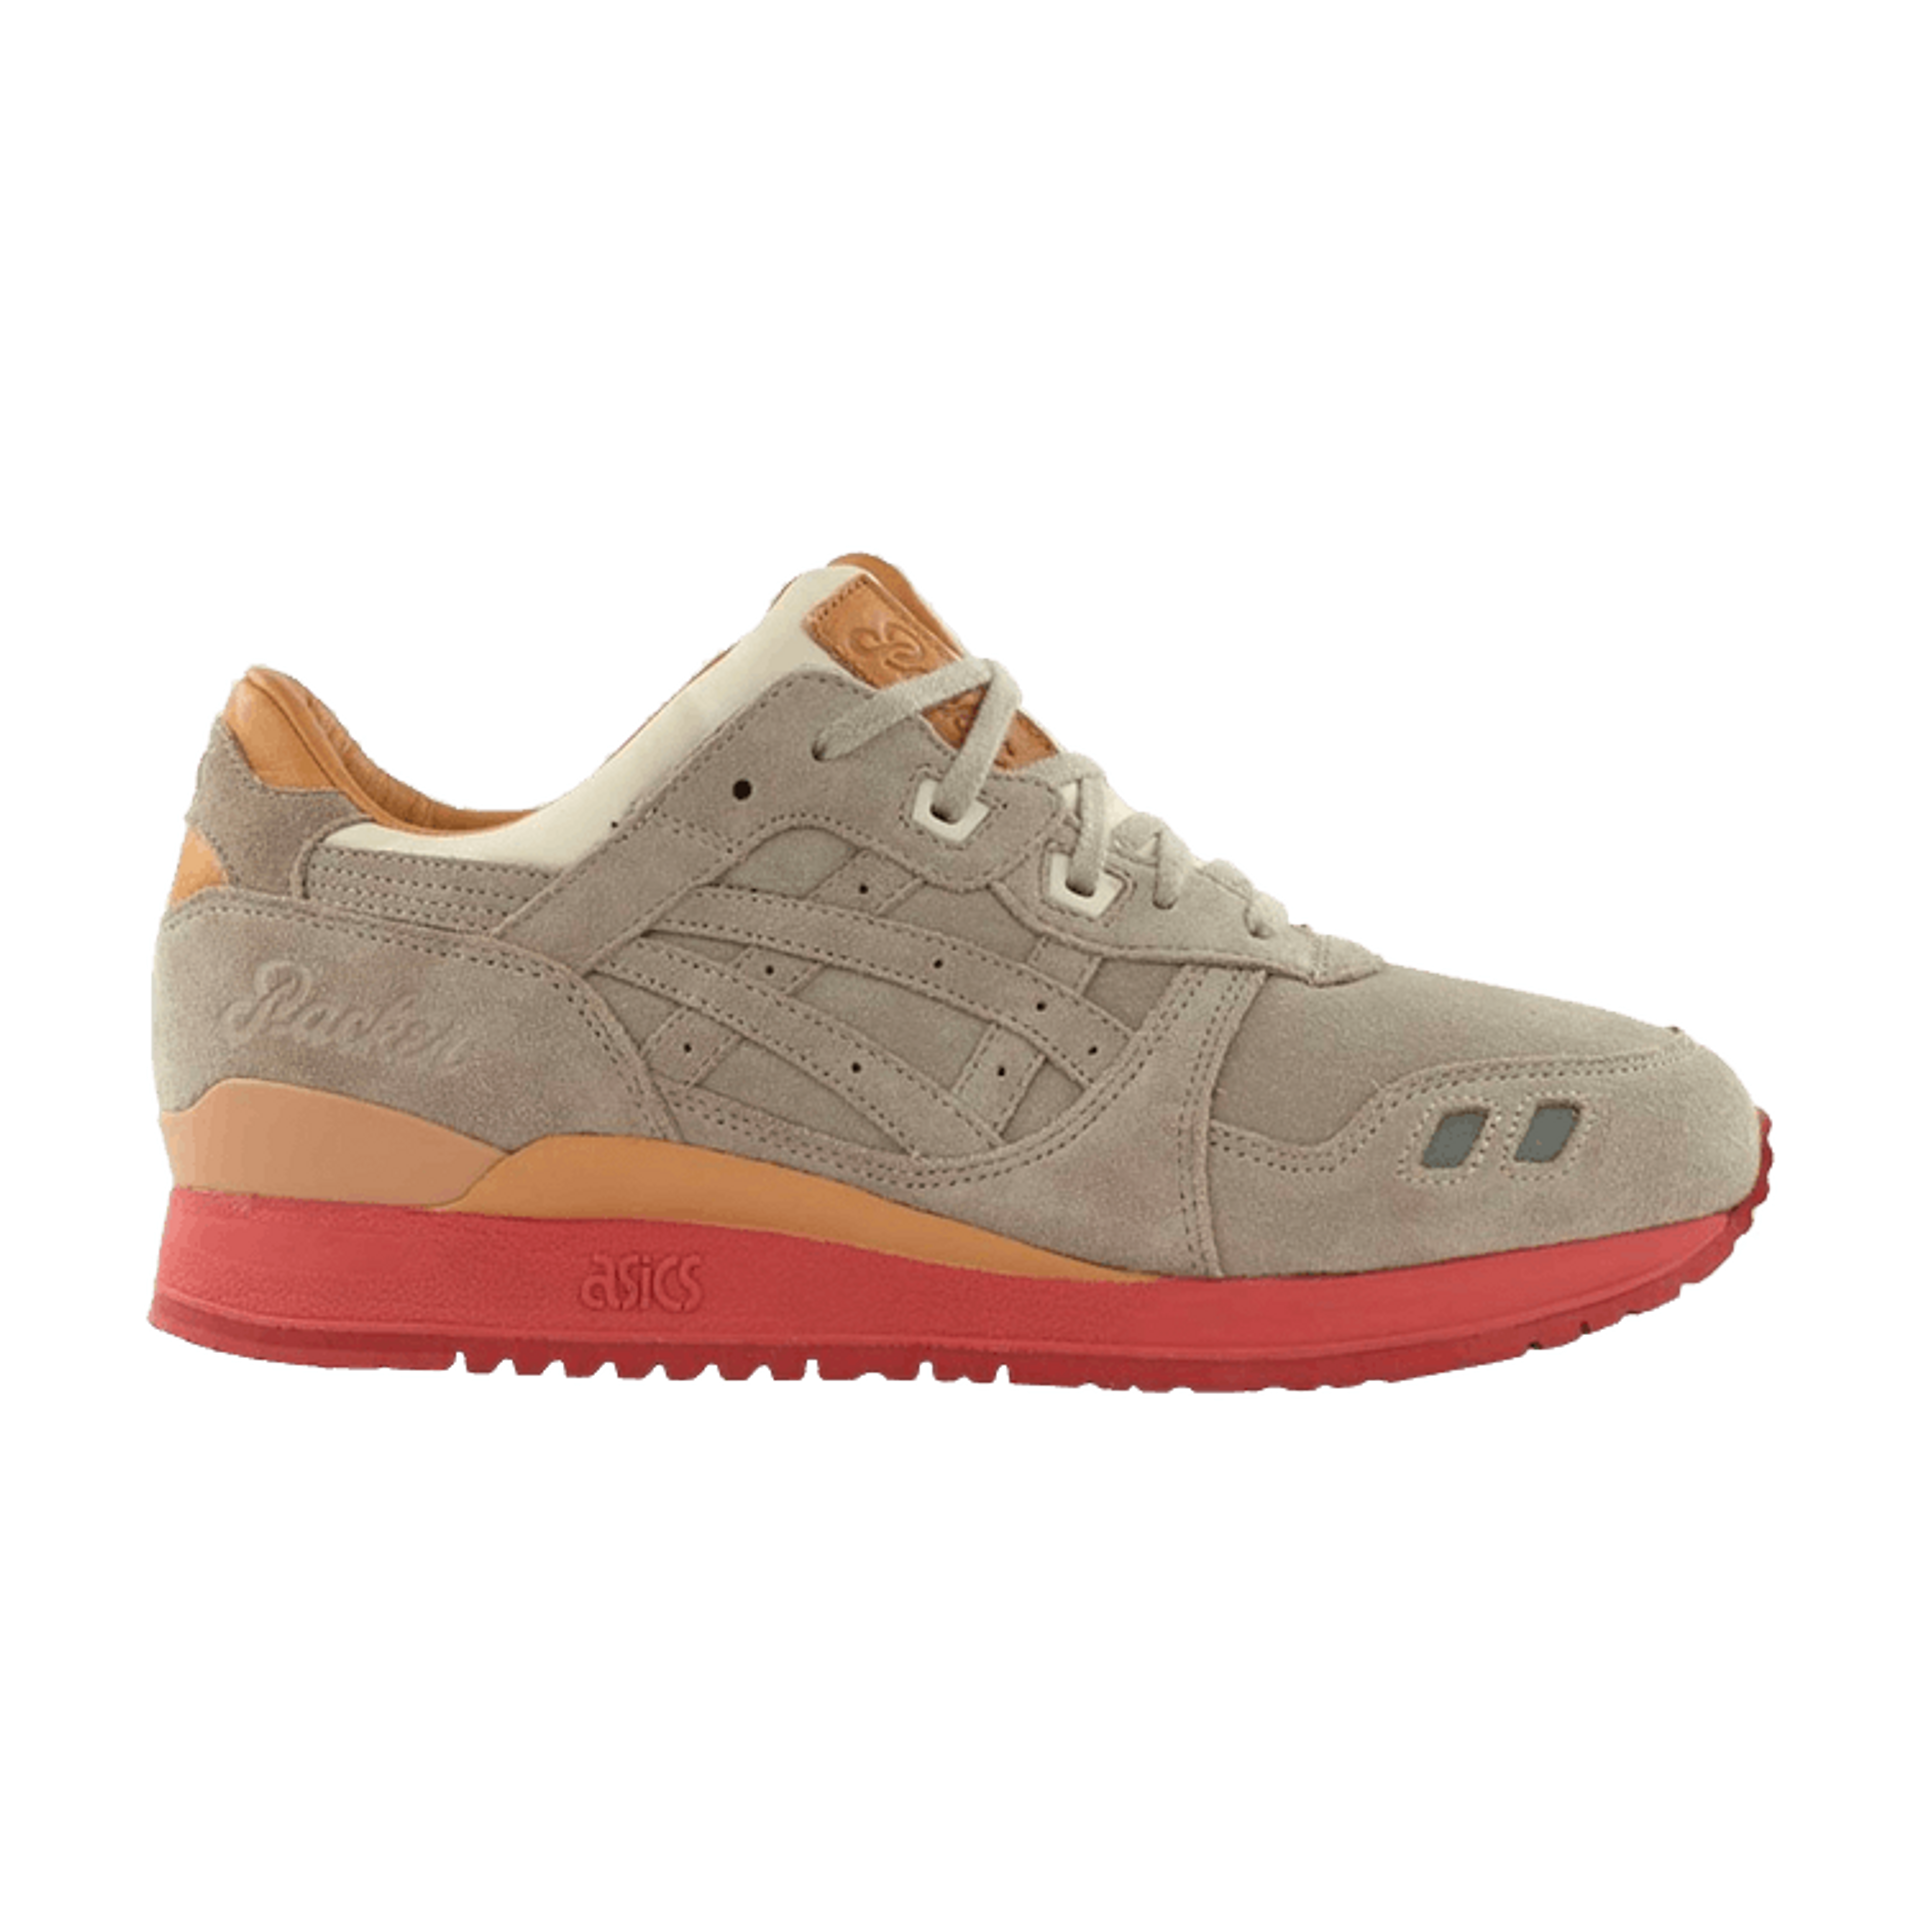 Packer Shoes x Gel Lyte 3 'Dirty Buck' Special Edition Box Set